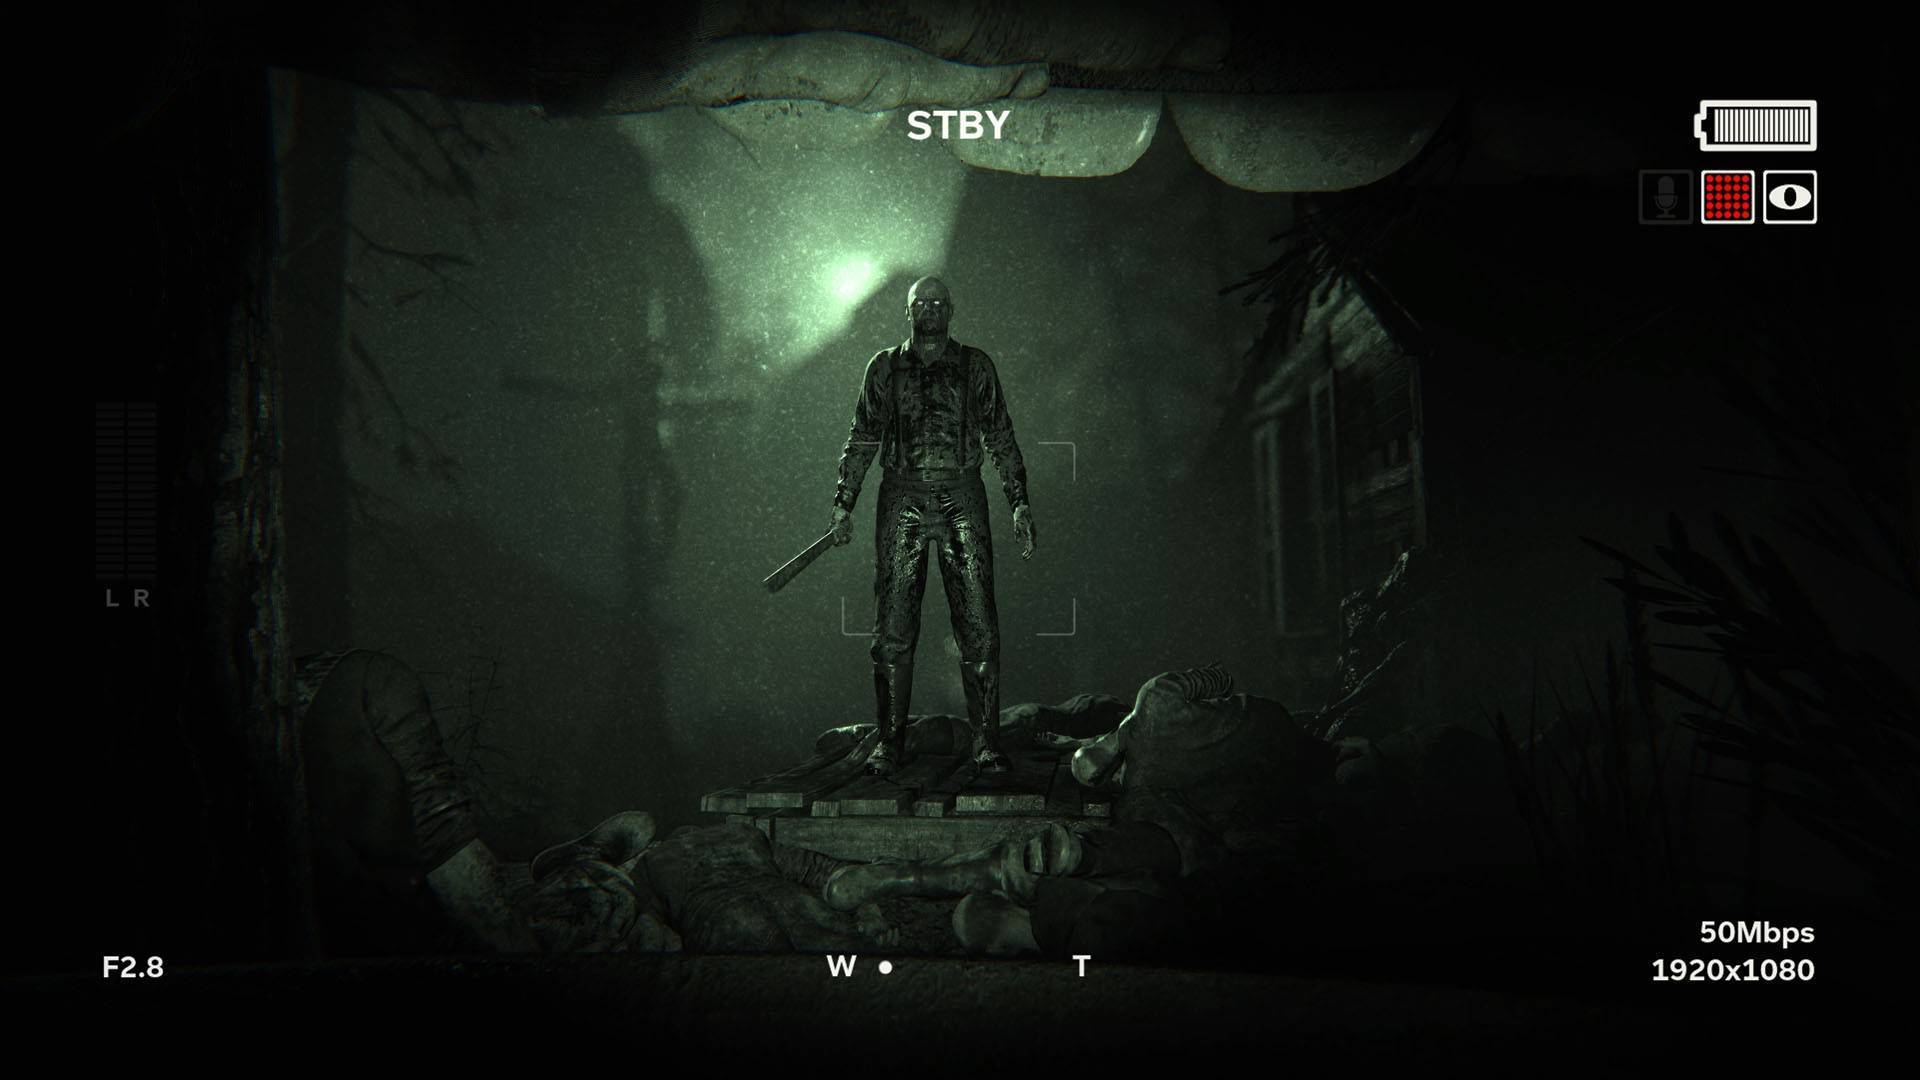 Dekking bemanning plaag Outlast Trinity (XBOX ONE) cheap - Price of $18.79